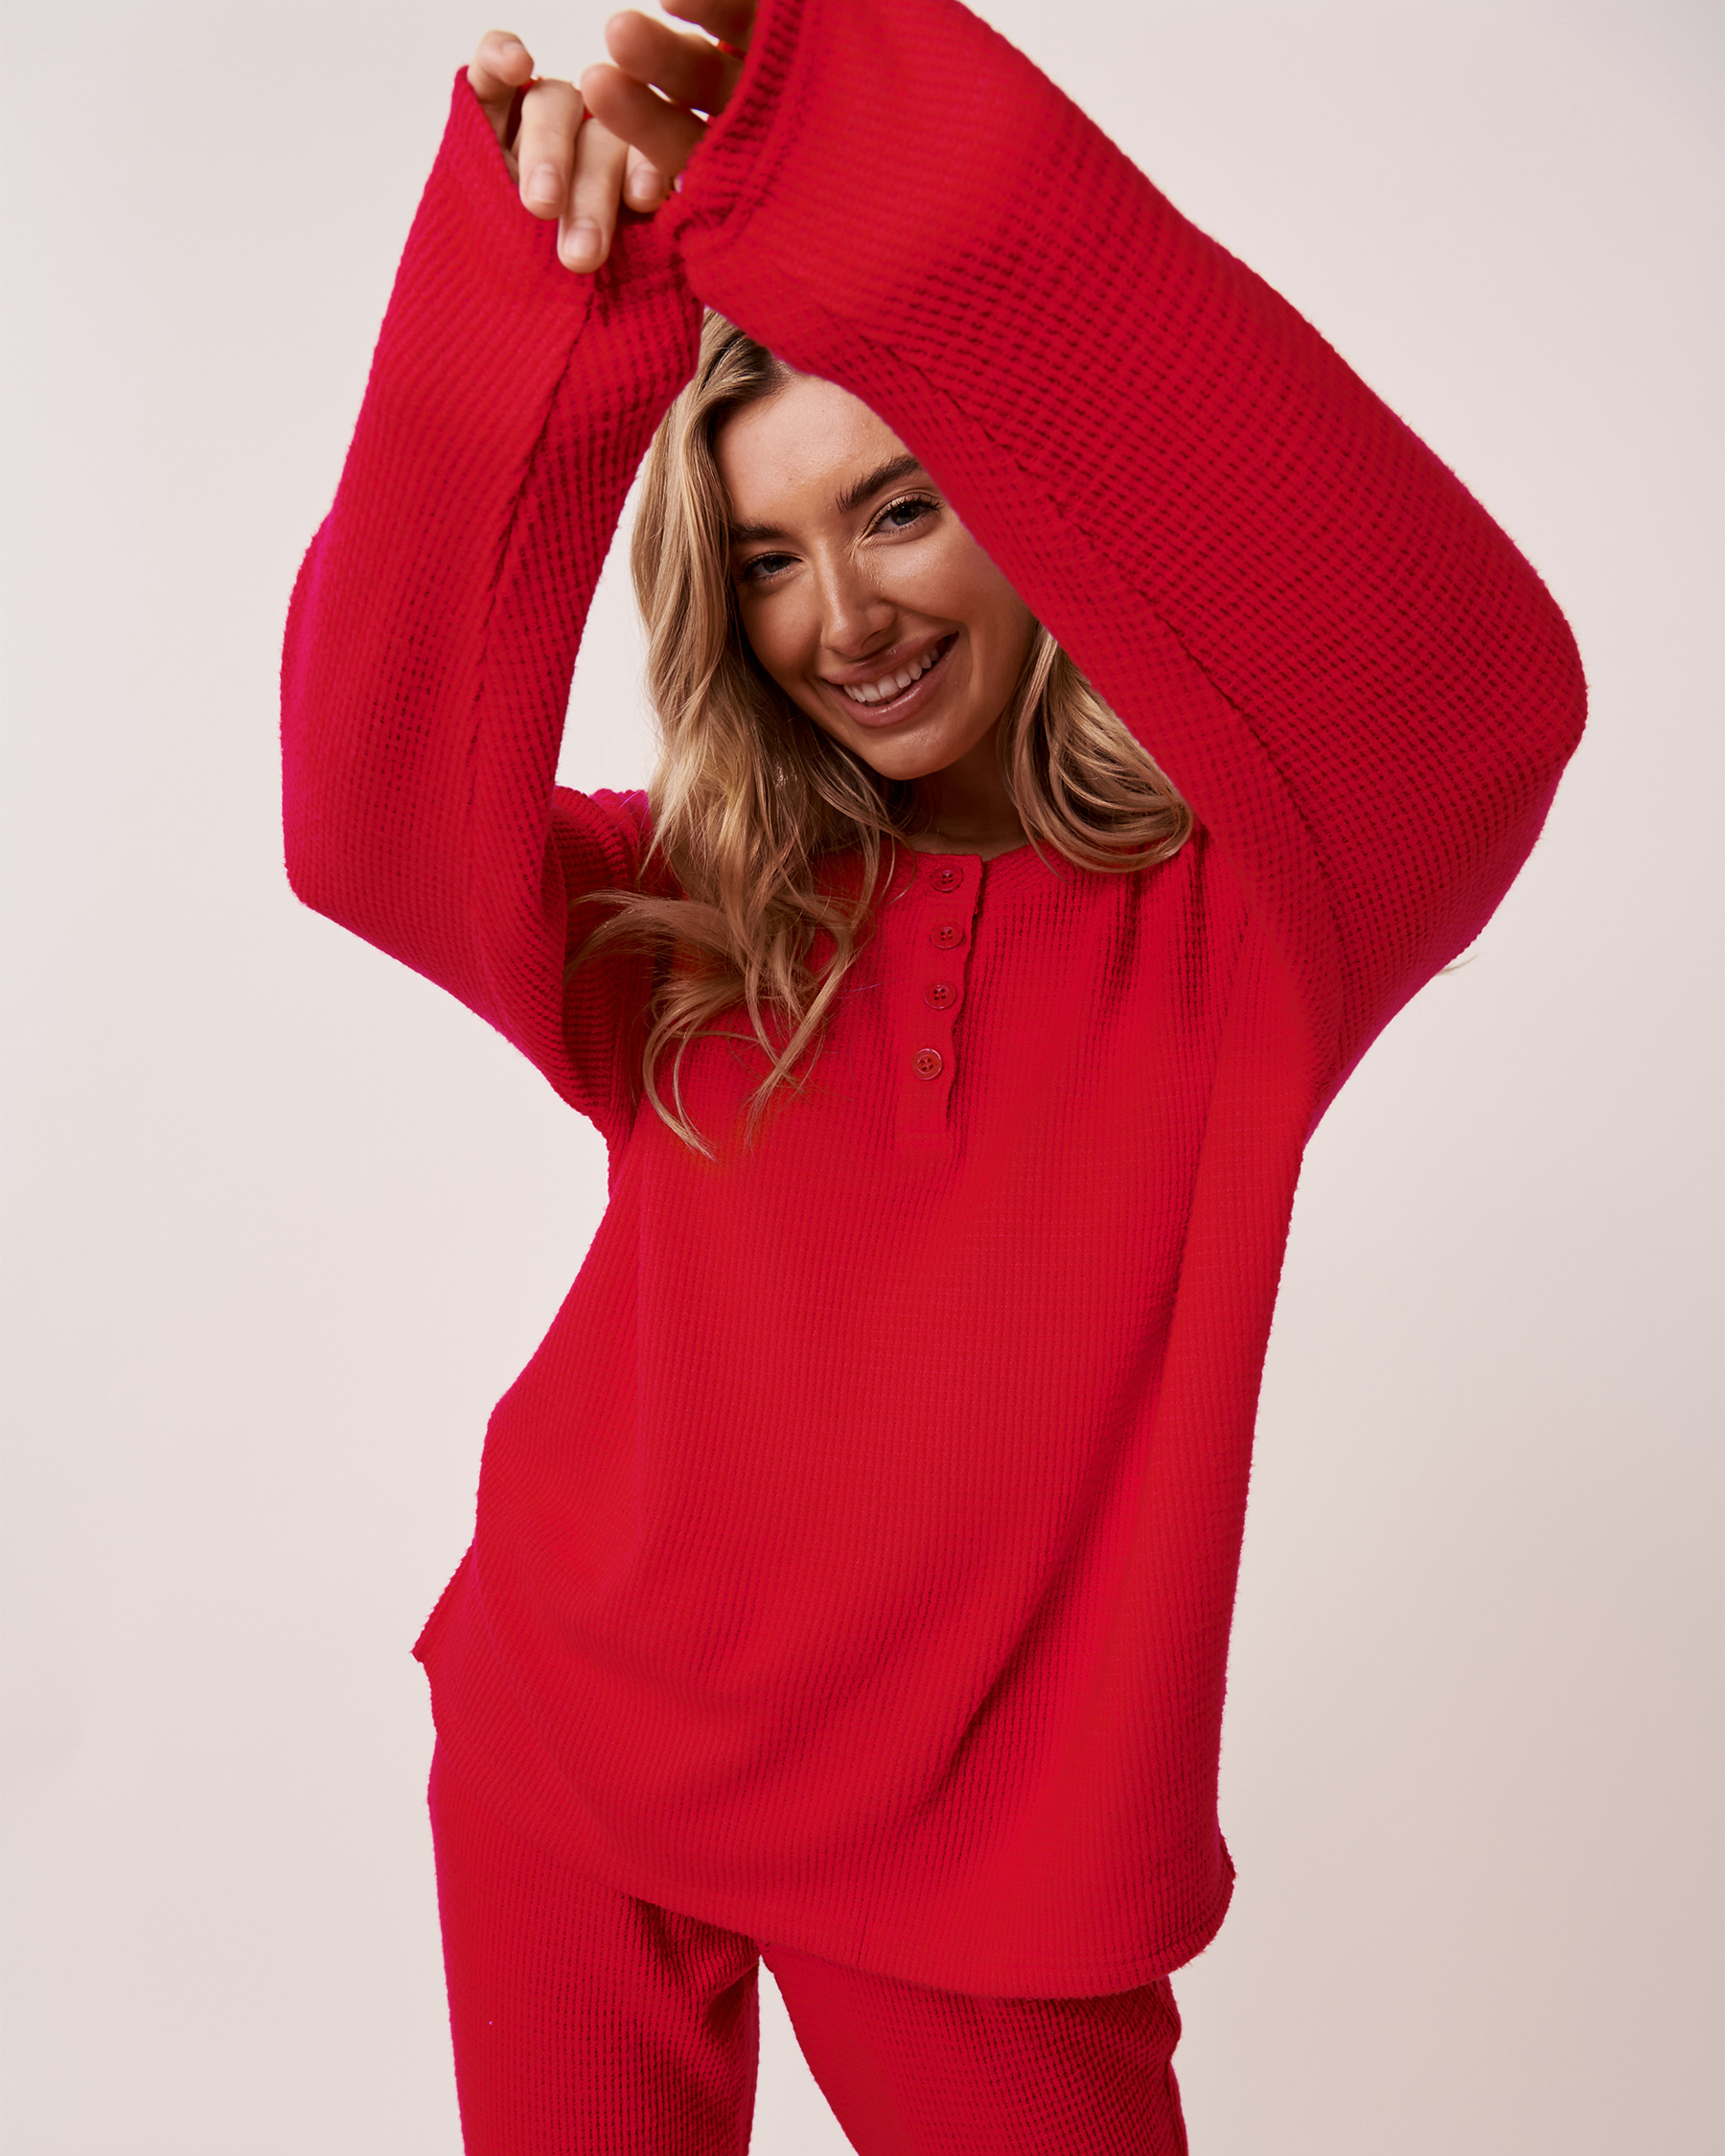 LA VIE EN ROSE Waffle Knit Long Sleeve Shirt Candy red 40100374 - View2